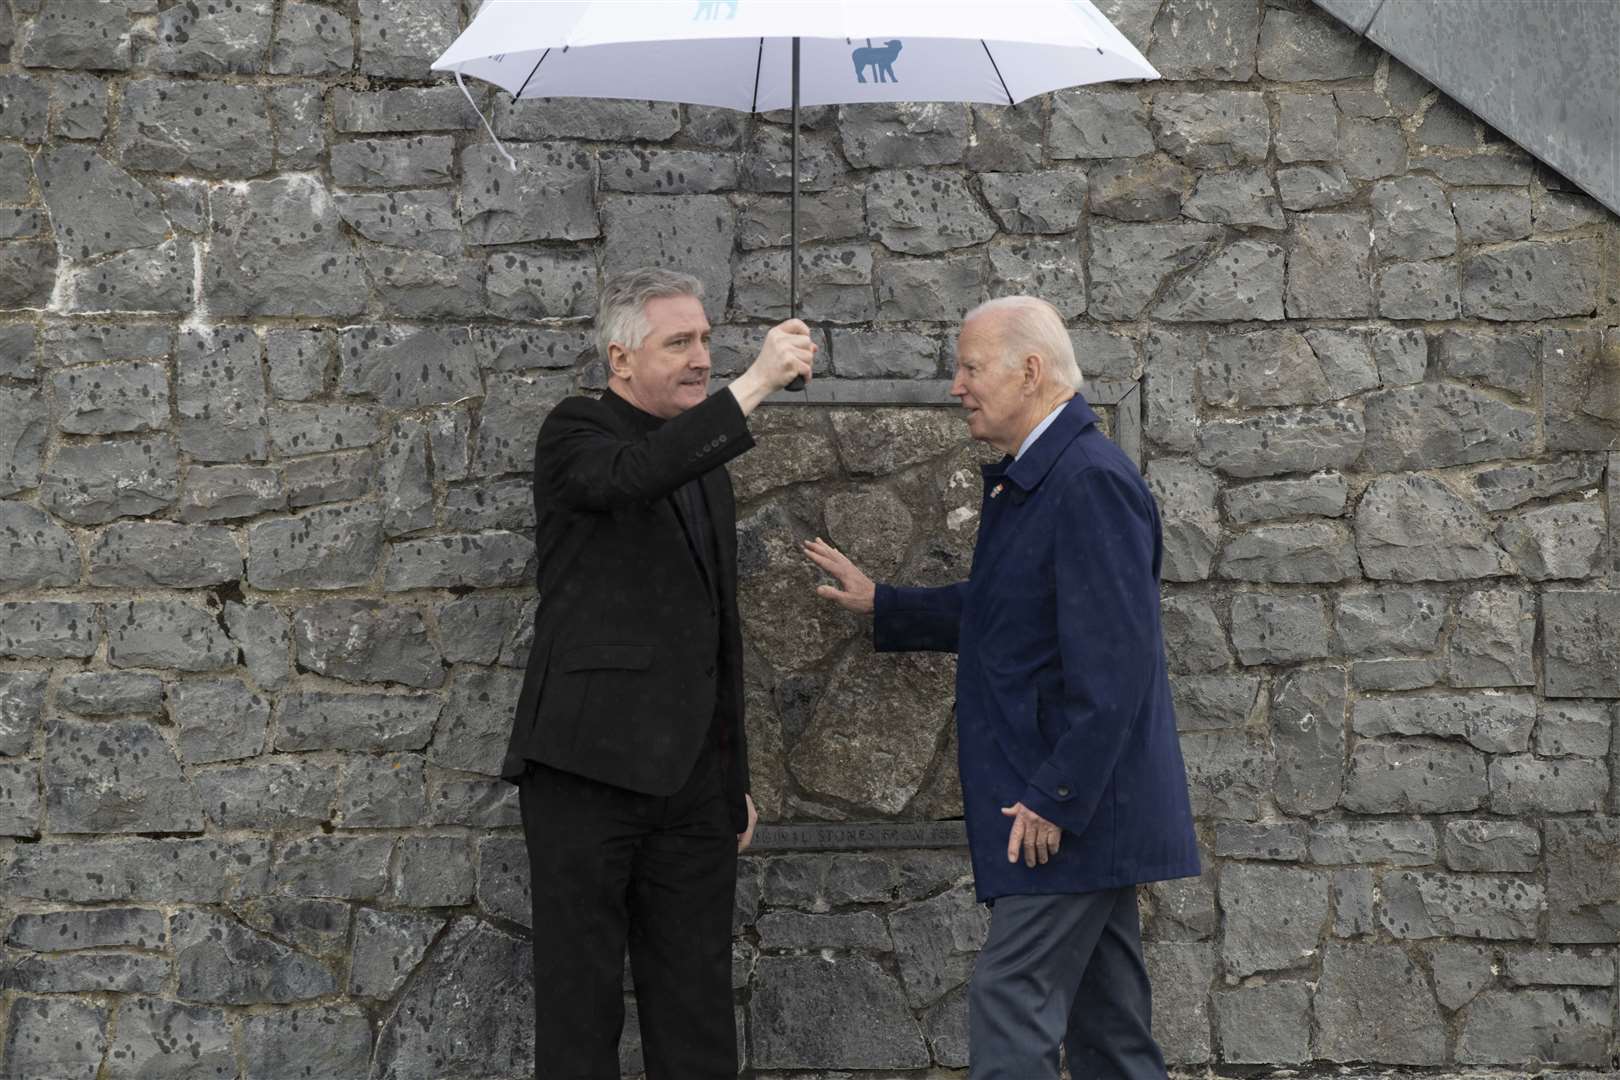 Mr Biden visited Knock Shrine and Basilica on Friday afternoon (Andrew Downes/Julien Behal Photography/PA)